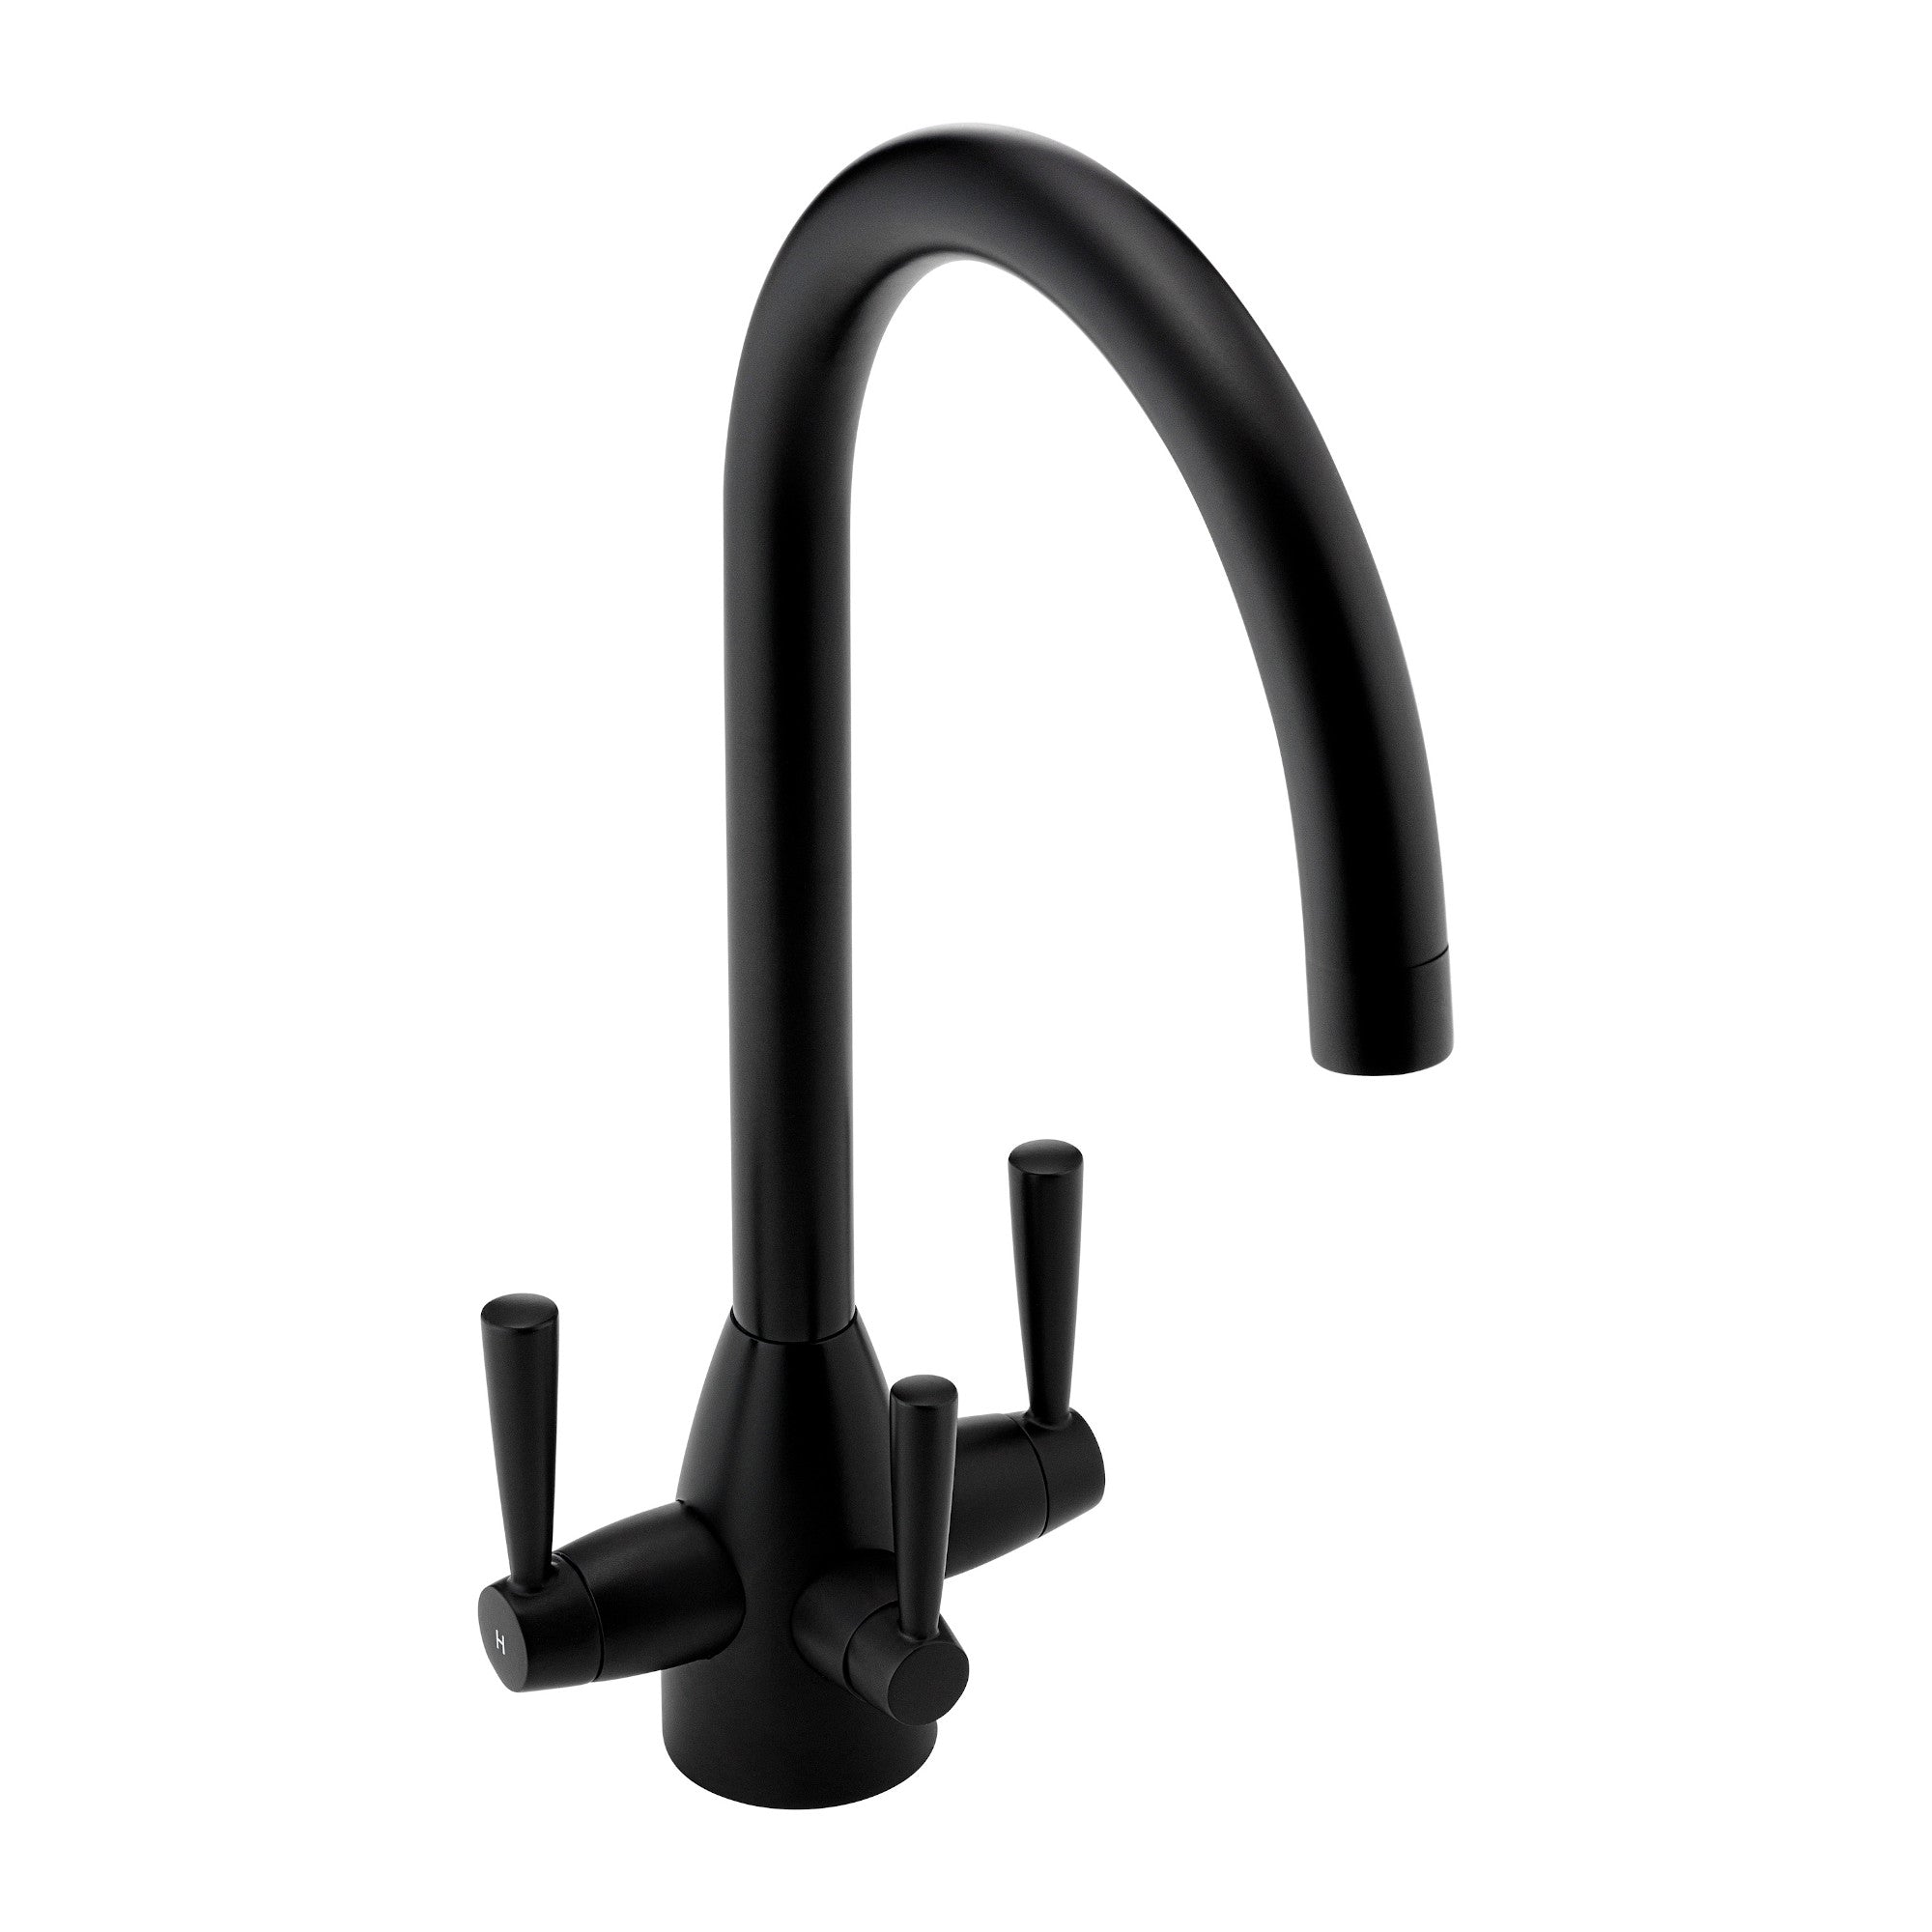 Torino modern filter tap with twin levers - black